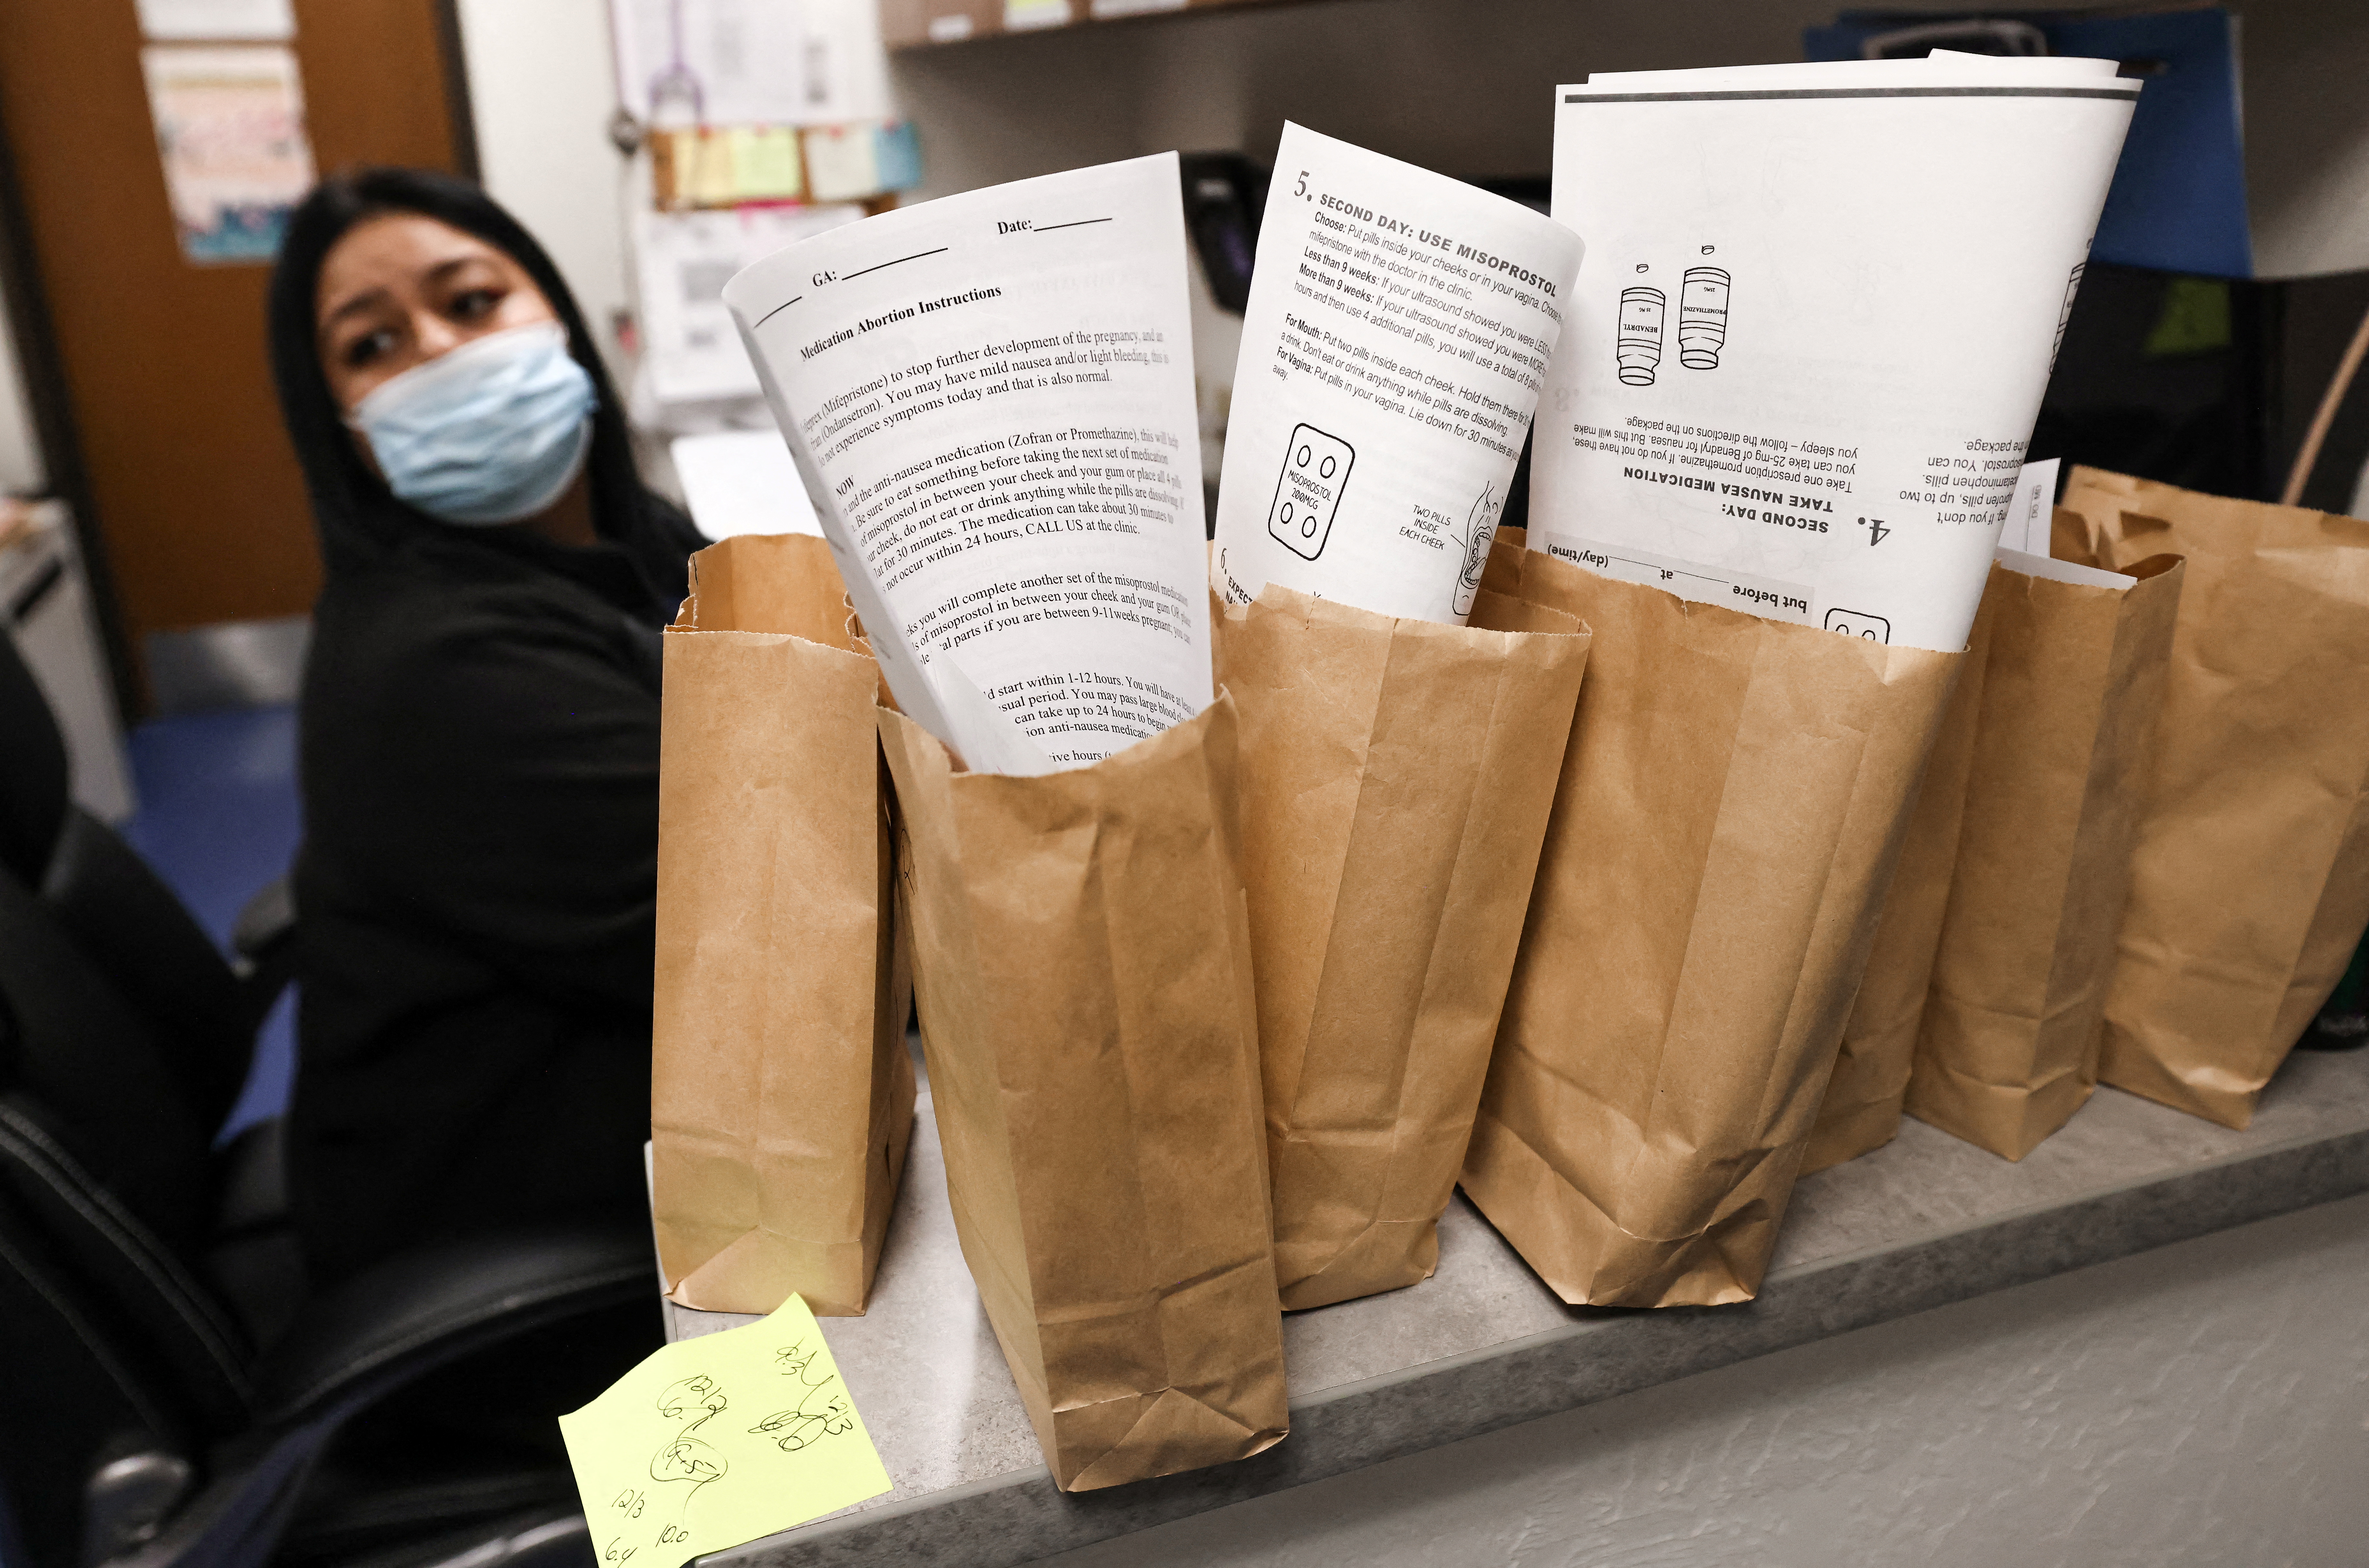 A patient care coordinator prepares bags containing the medication used for a medical abortion and follow-up instructions for patients who will be having abortions that day at Trust Women clinic in Oklahoma City, U.S., December 6, 2021. Of the 20 abortions performed that day, 17 of the patients came from Texas. REUTERS/Evelyn Hockstein